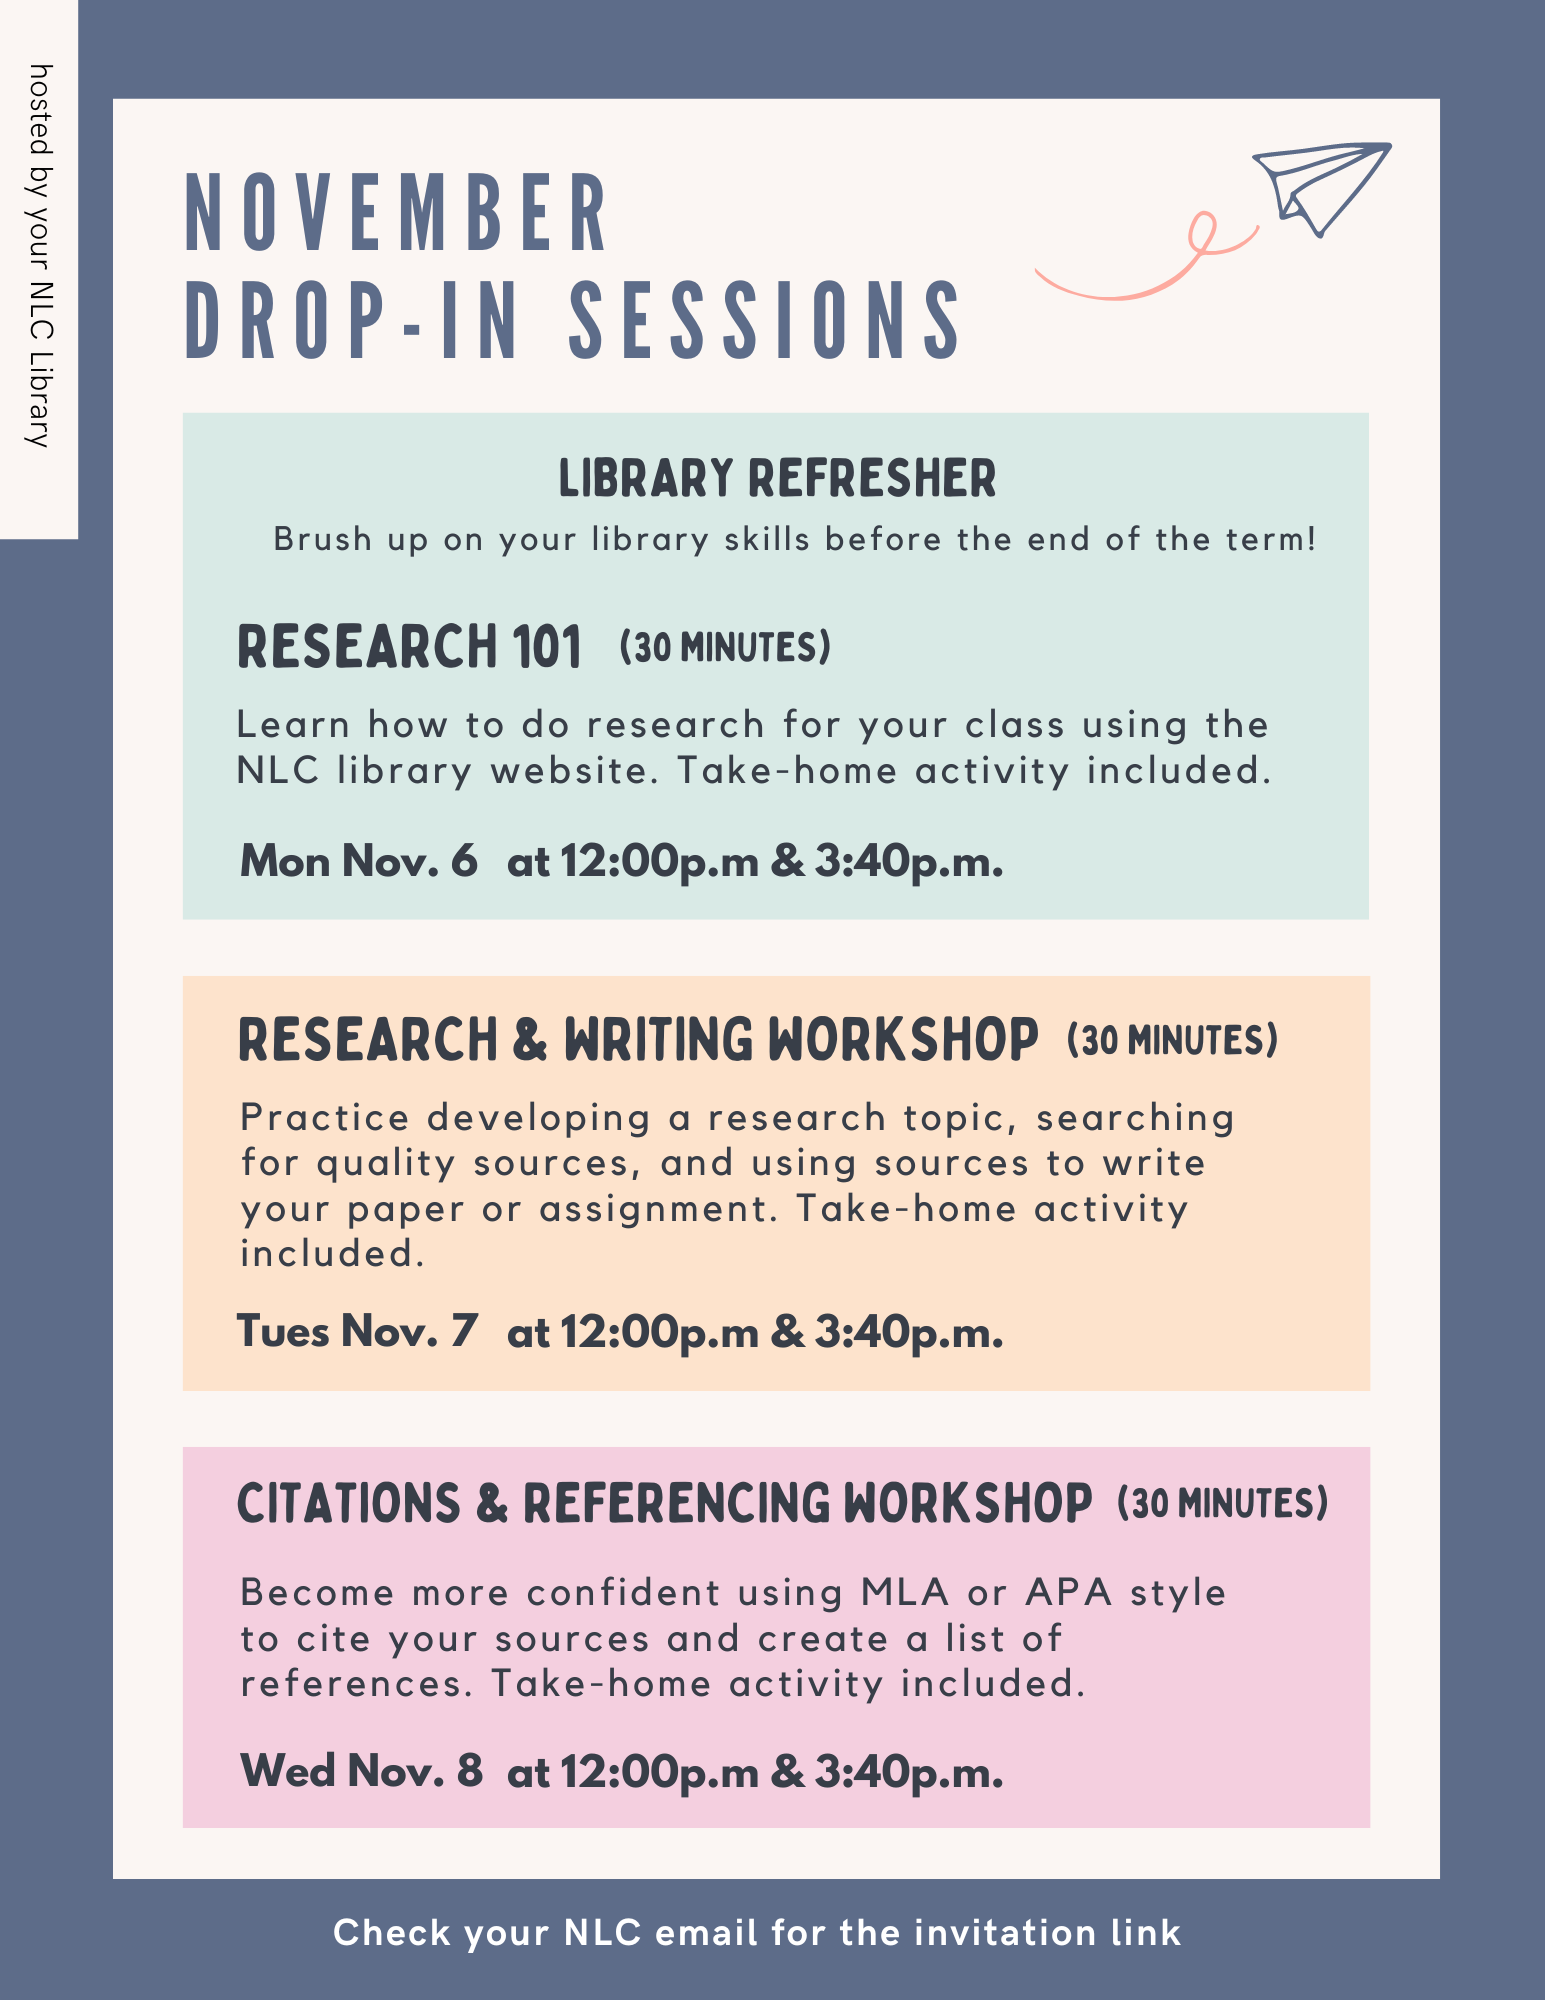 Library Refresher. 30-minute sessions. Research 101 November 6th 12:00pm and 3:40pm. Research and Writing Workshop November 7th 12:00pm and 3:40pm. Citations and Referencing Workshop November 8th 12:00pm and 3:40pm.